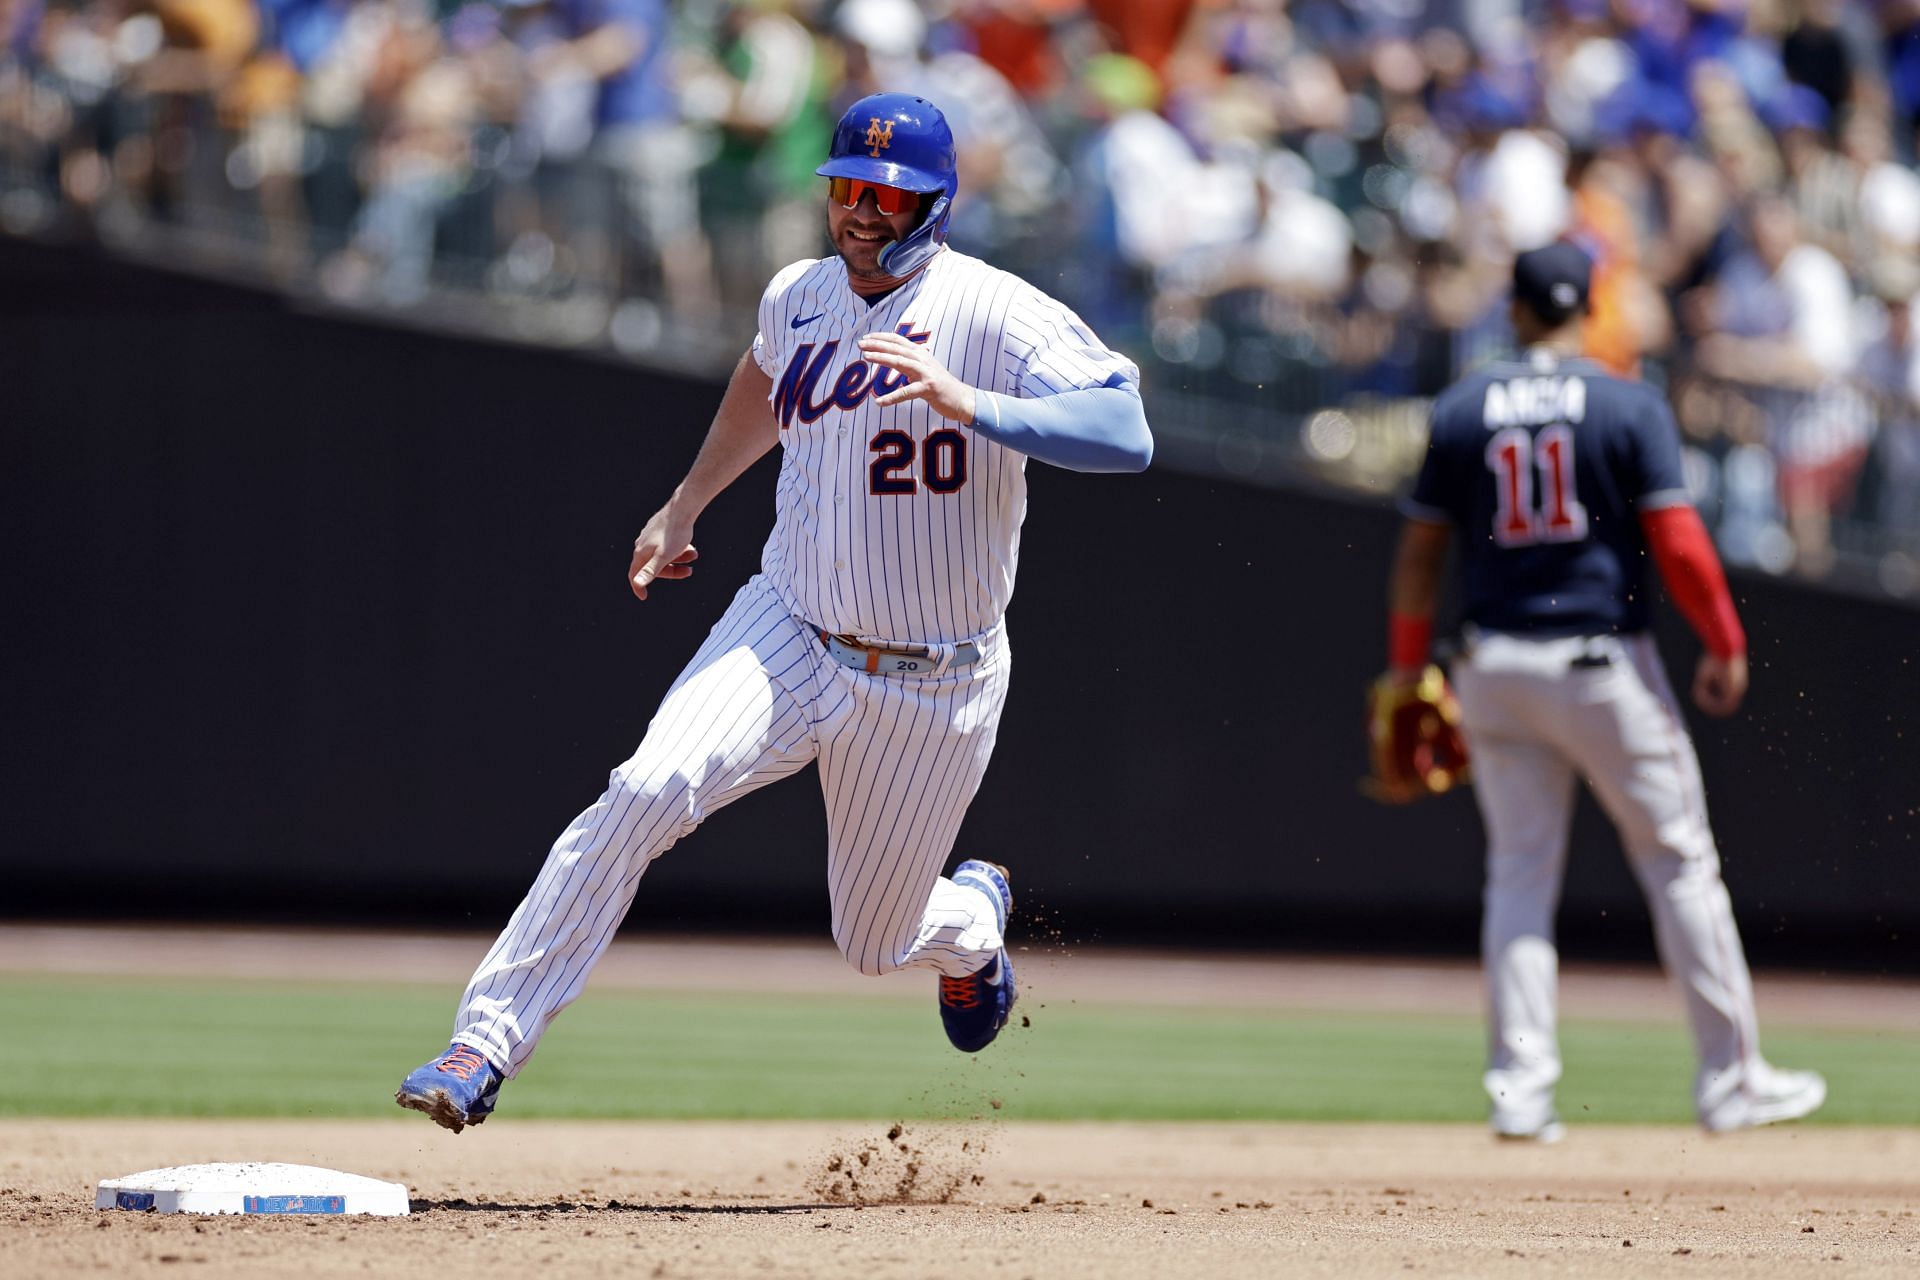 Pete Alonso rounds second base against the Atlanta Braves in the first game of a doubleheader at Citi Field